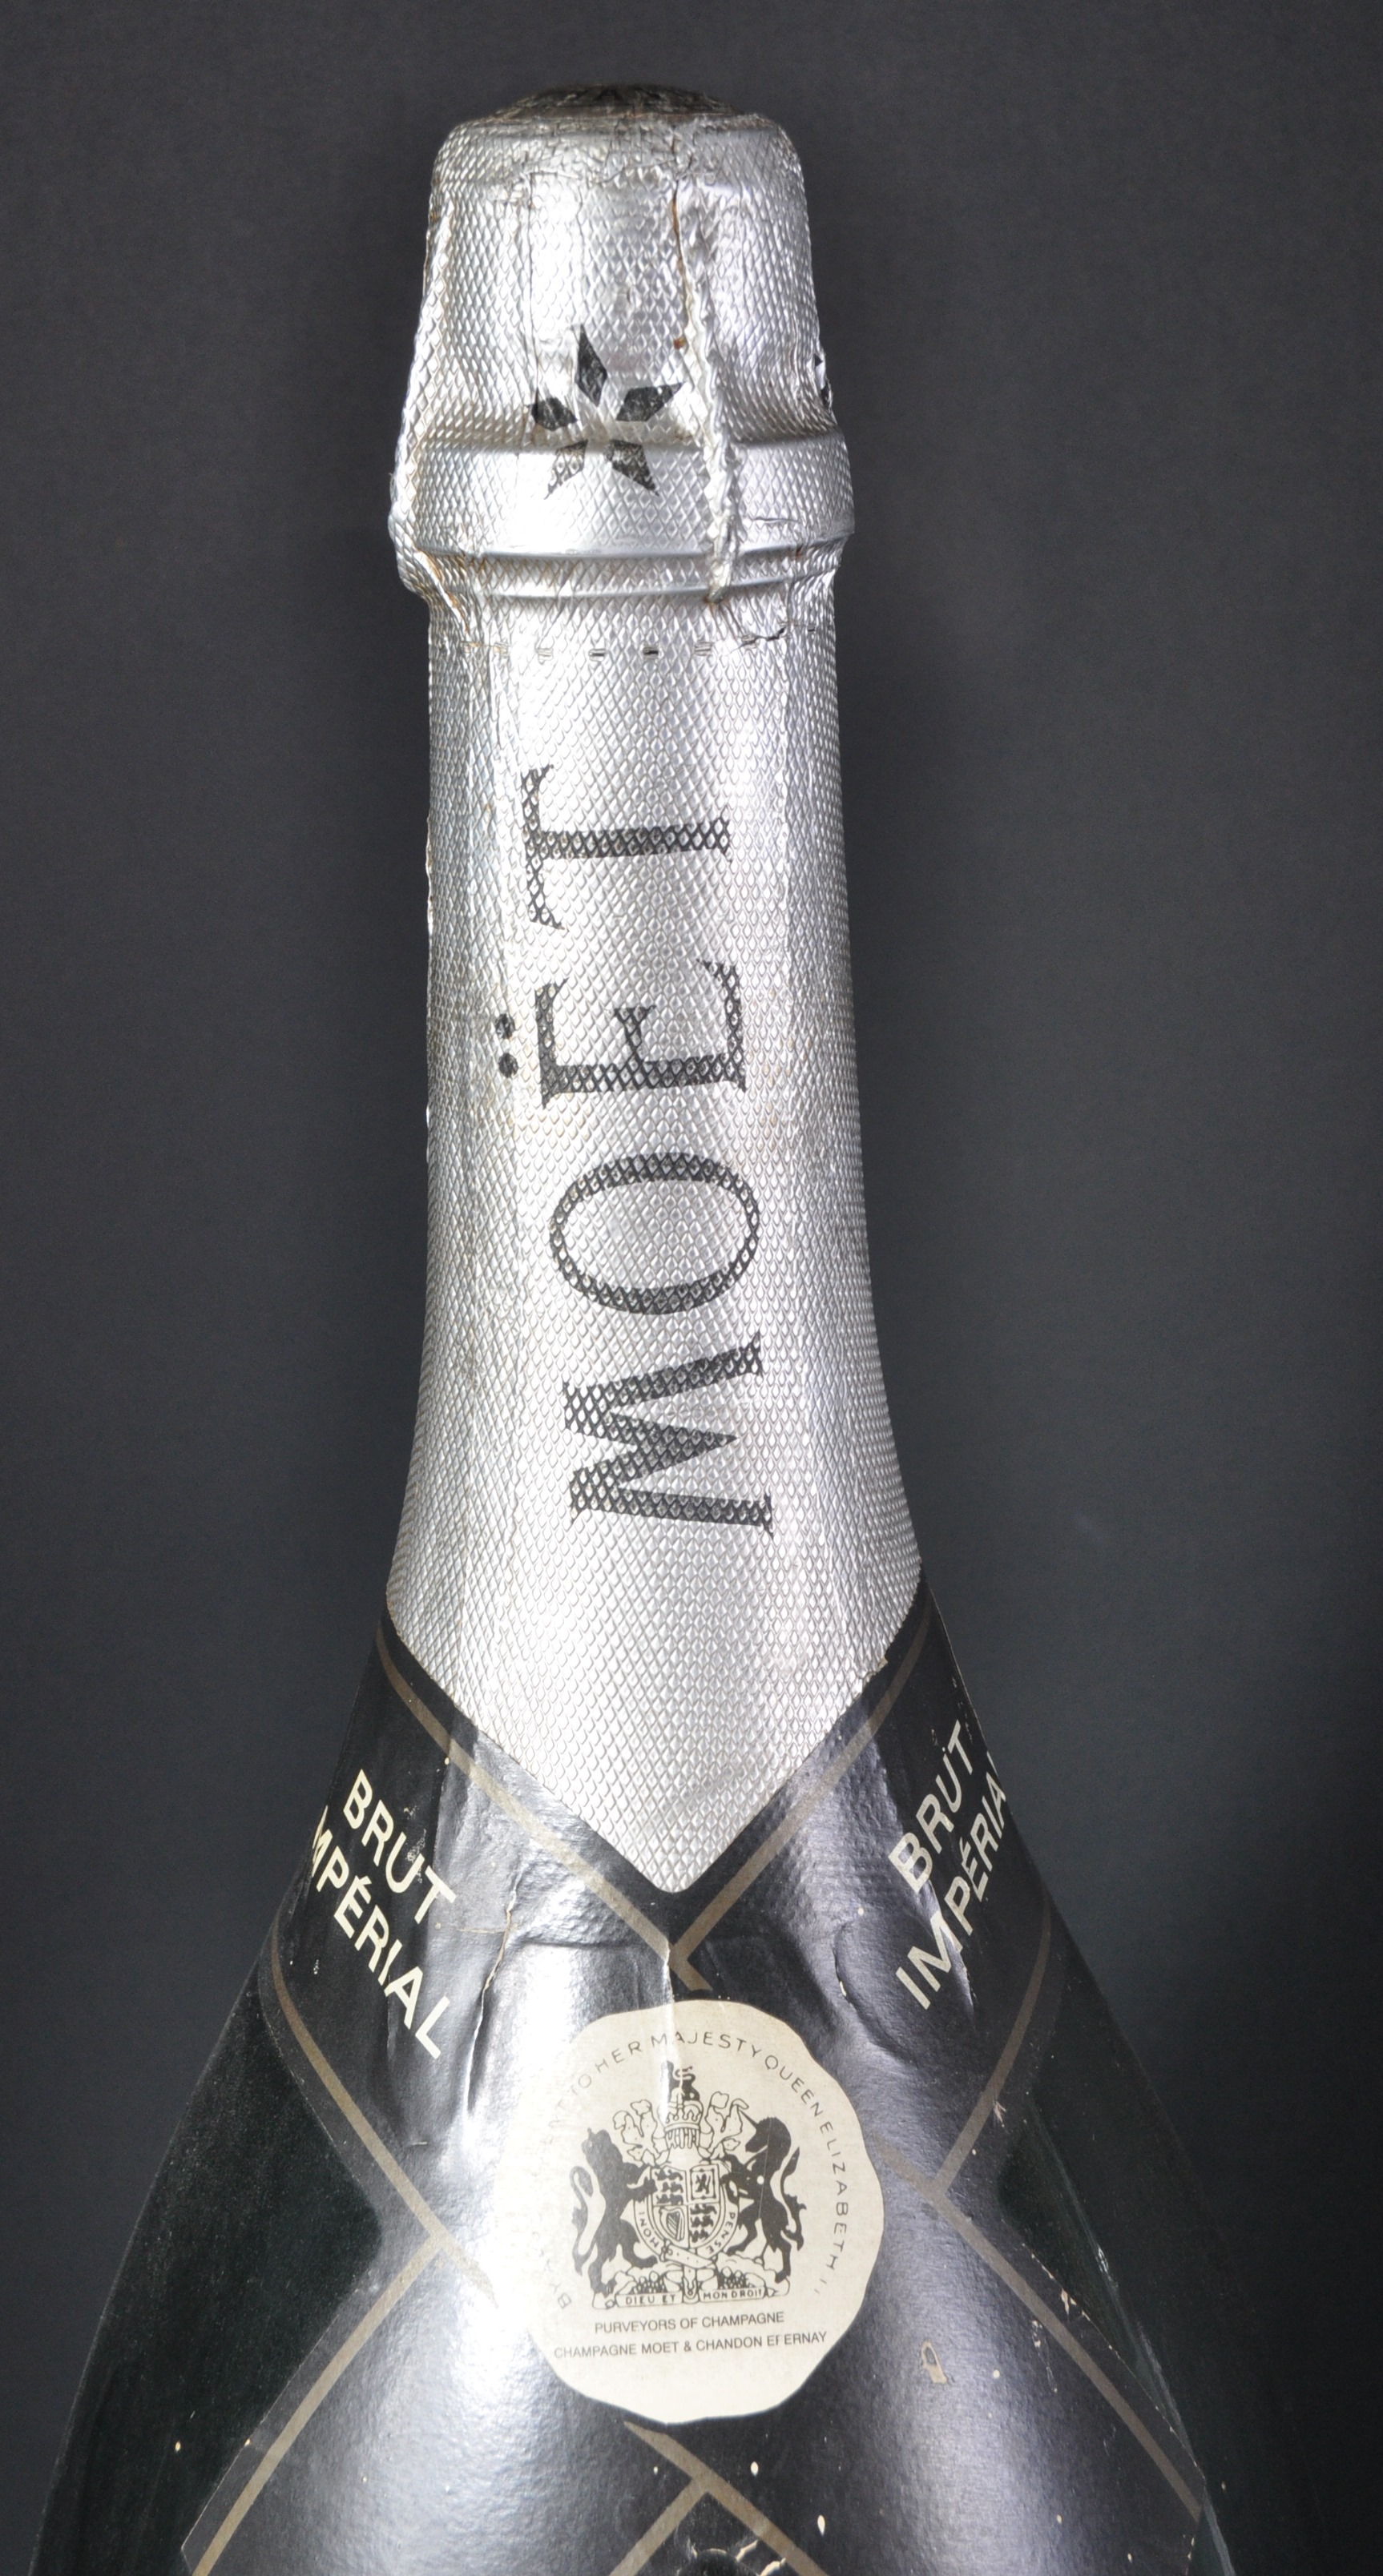 COLLECTION OF MOET CHAMPAGNE DISPLAY BOTTLES - Image 4 of 7